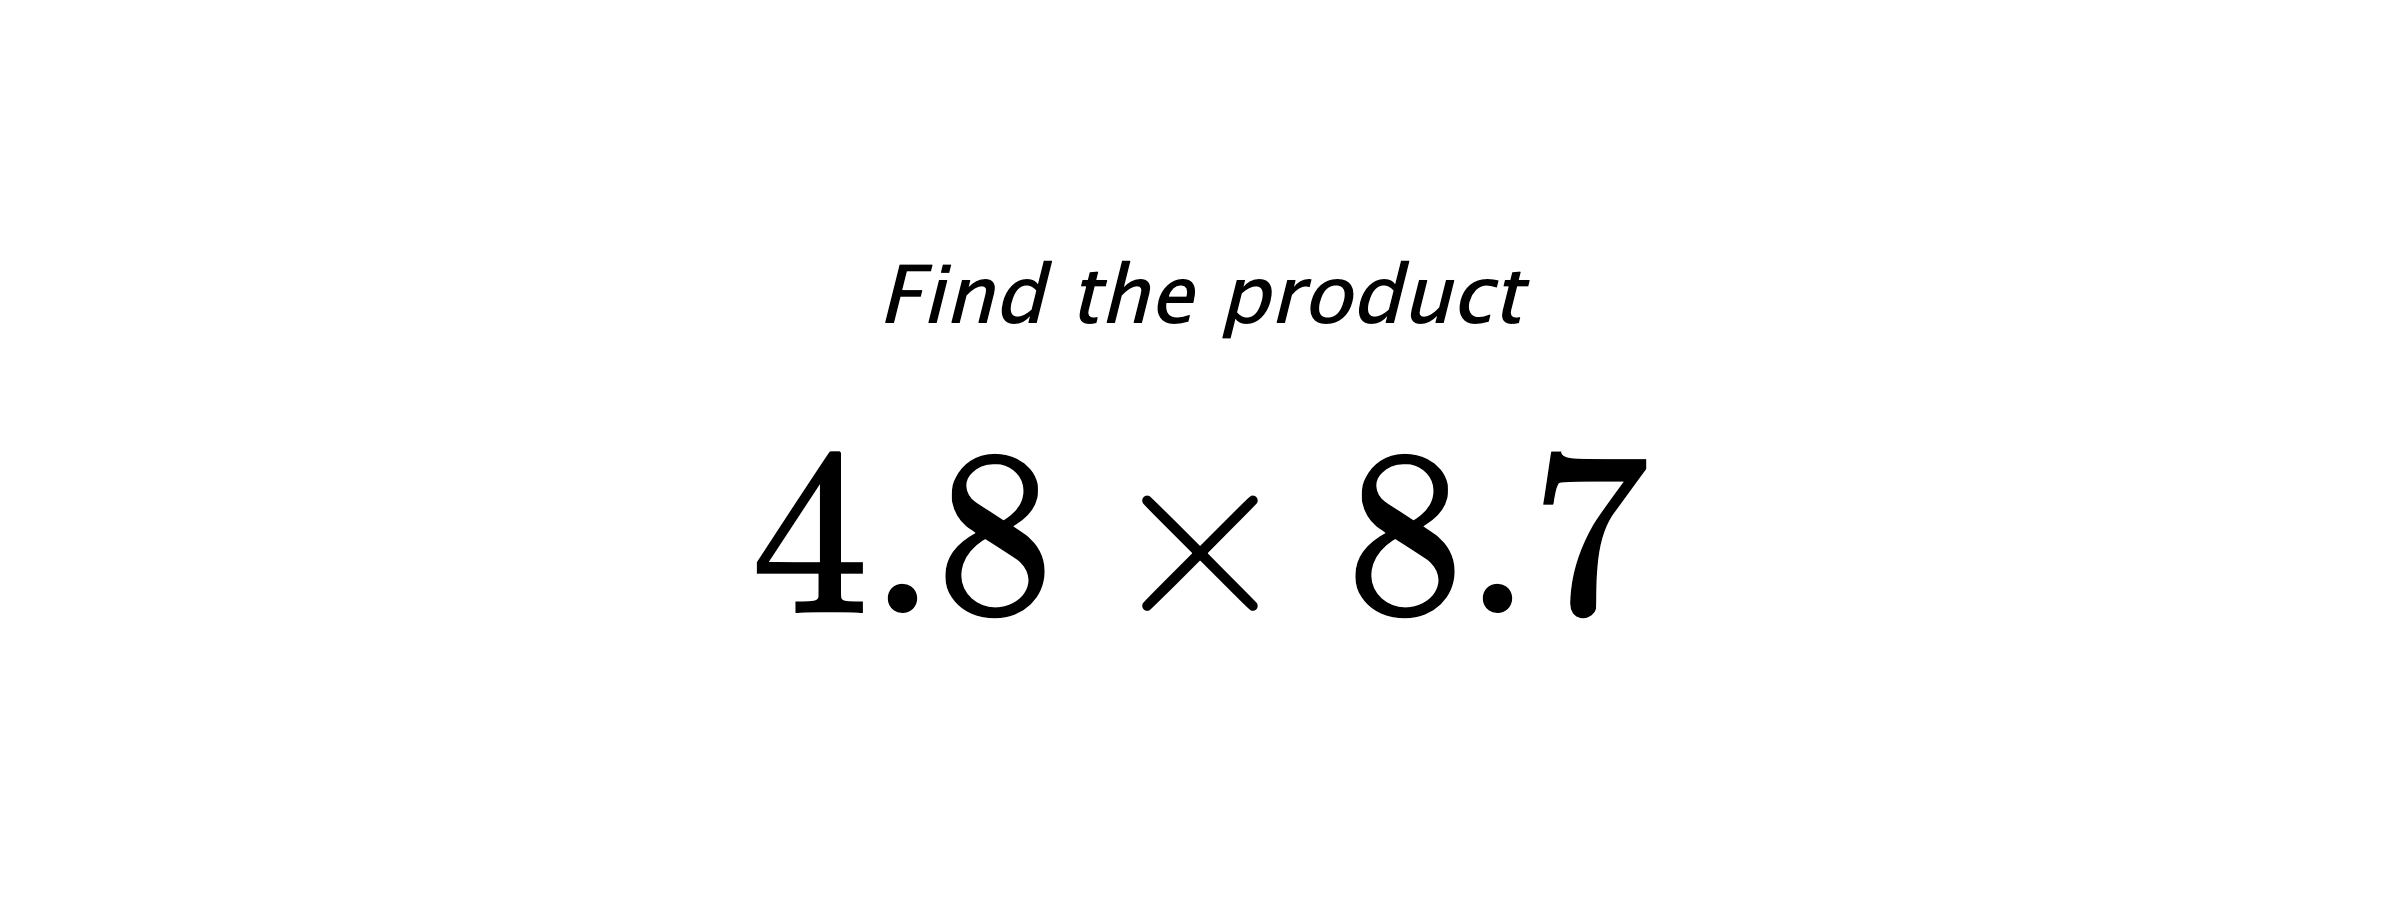 Find the product $ 4.8 \times 8.7 $